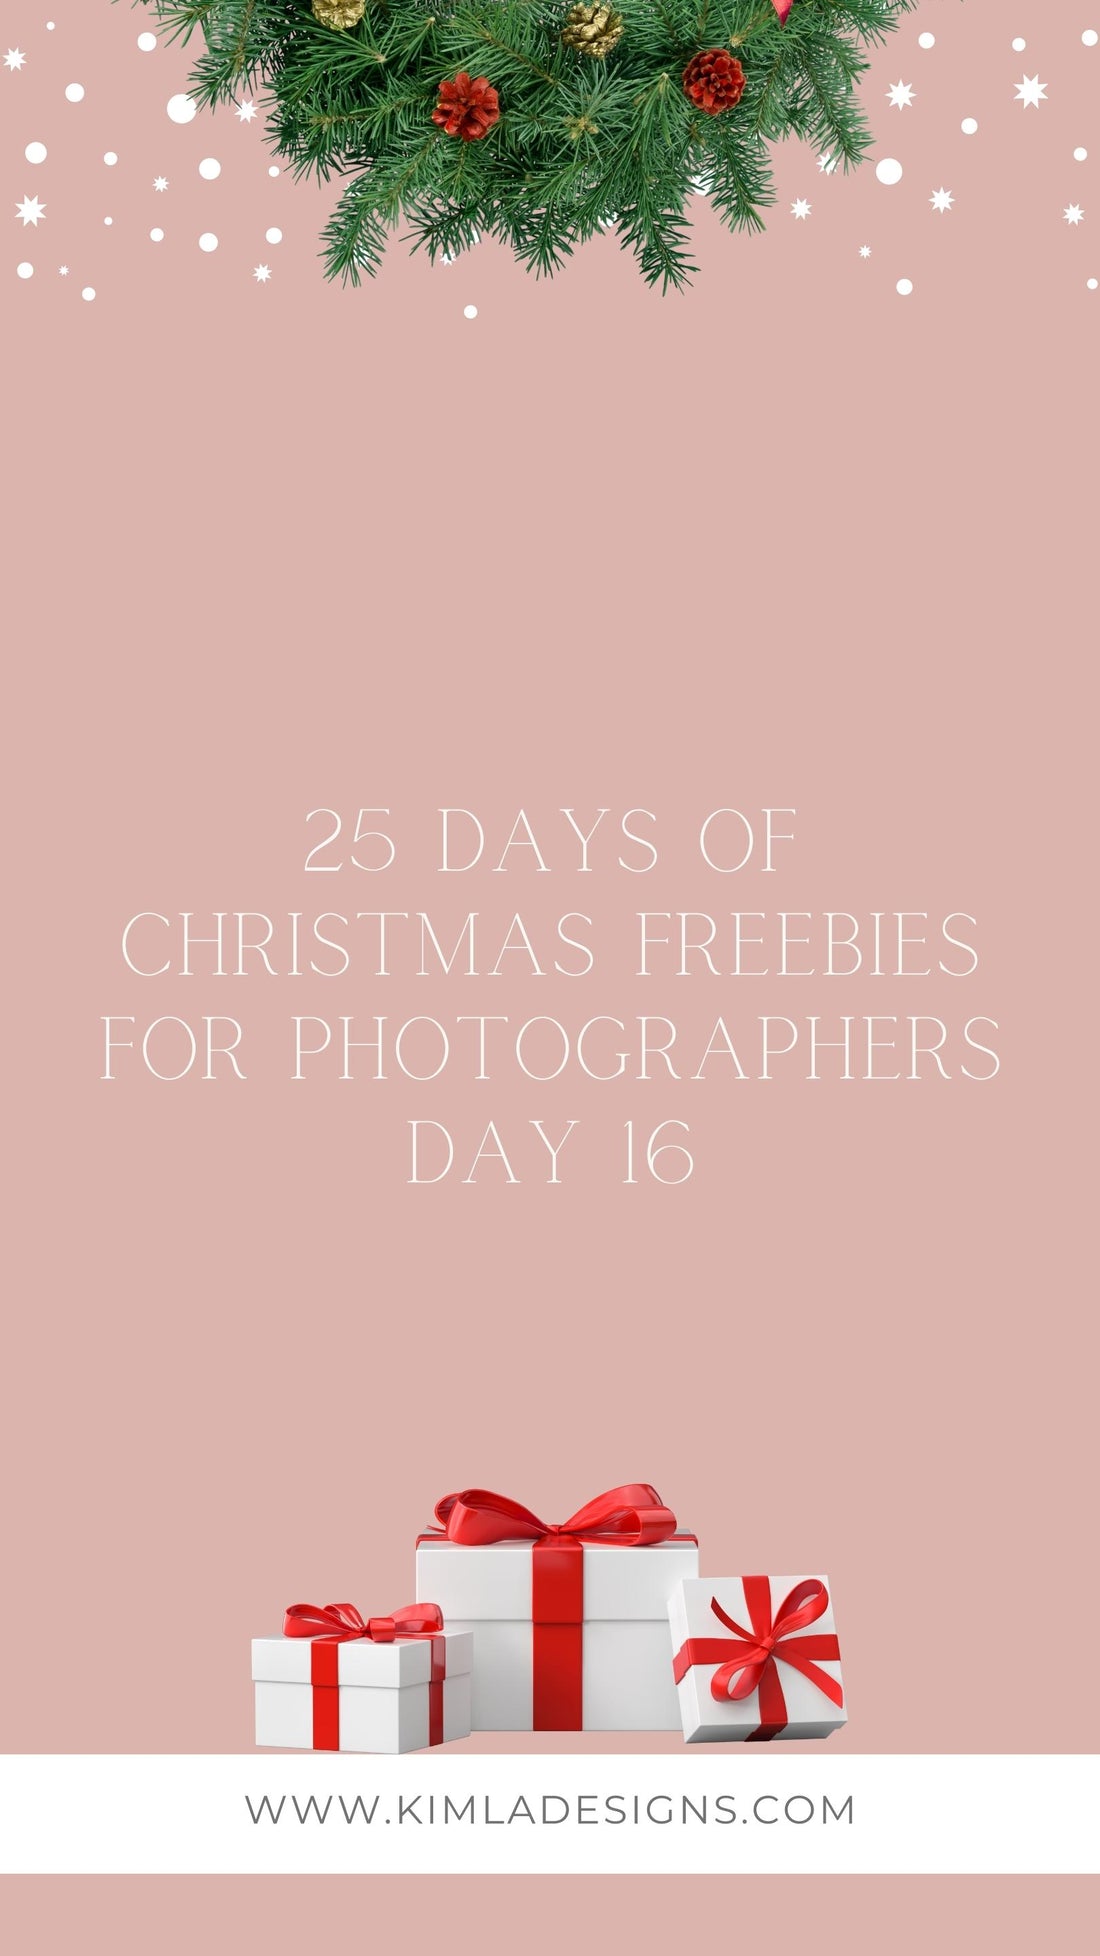 25 Days of Christmas Freebies Day 16th